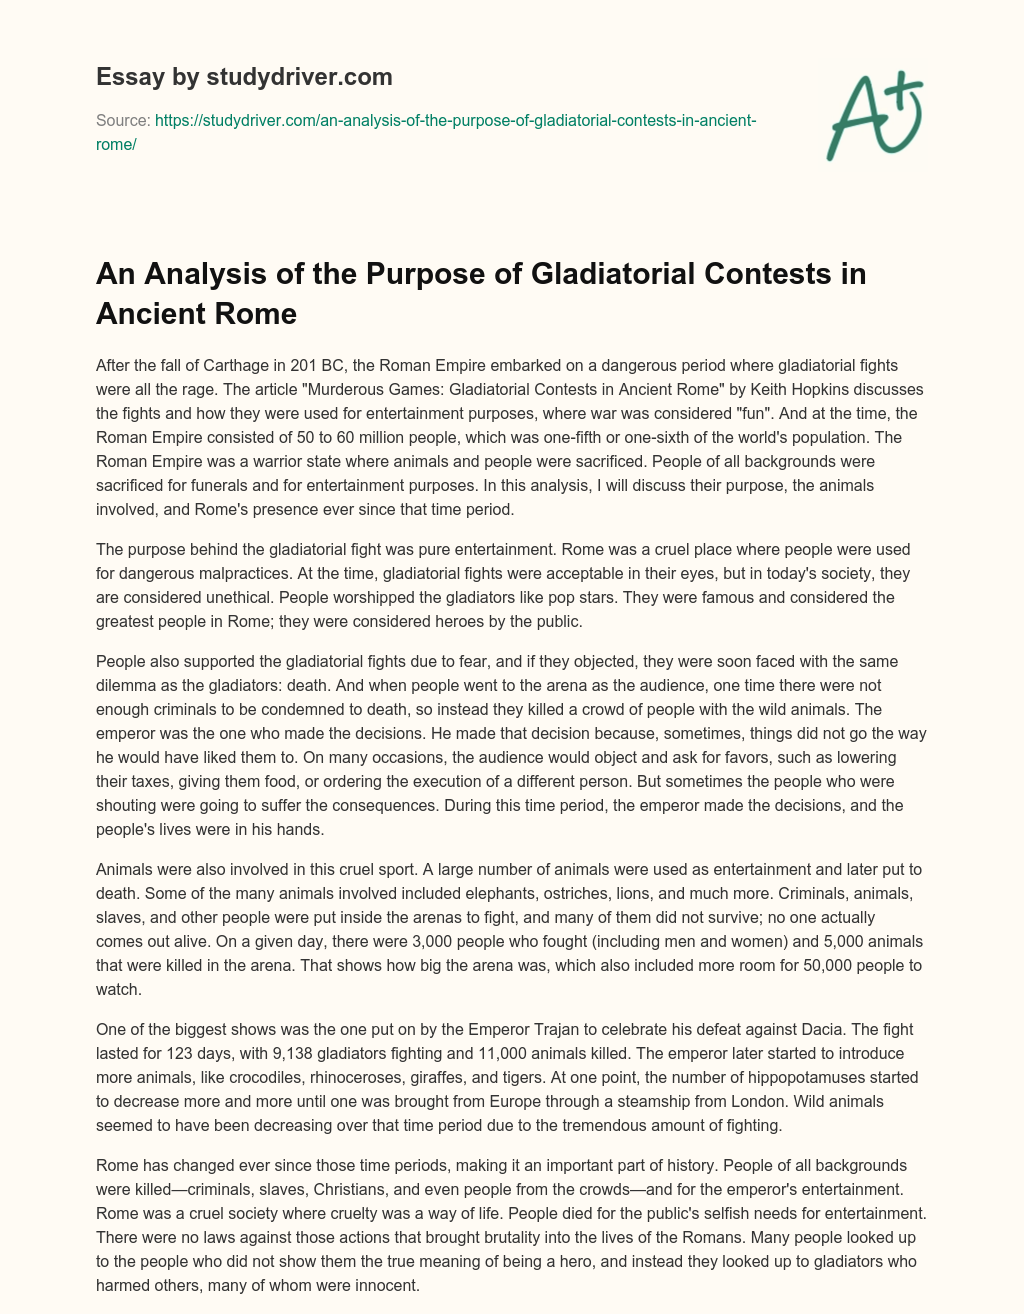 An Analysis of the Purpose of Gladiatorial Contests in Ancient Rome essay